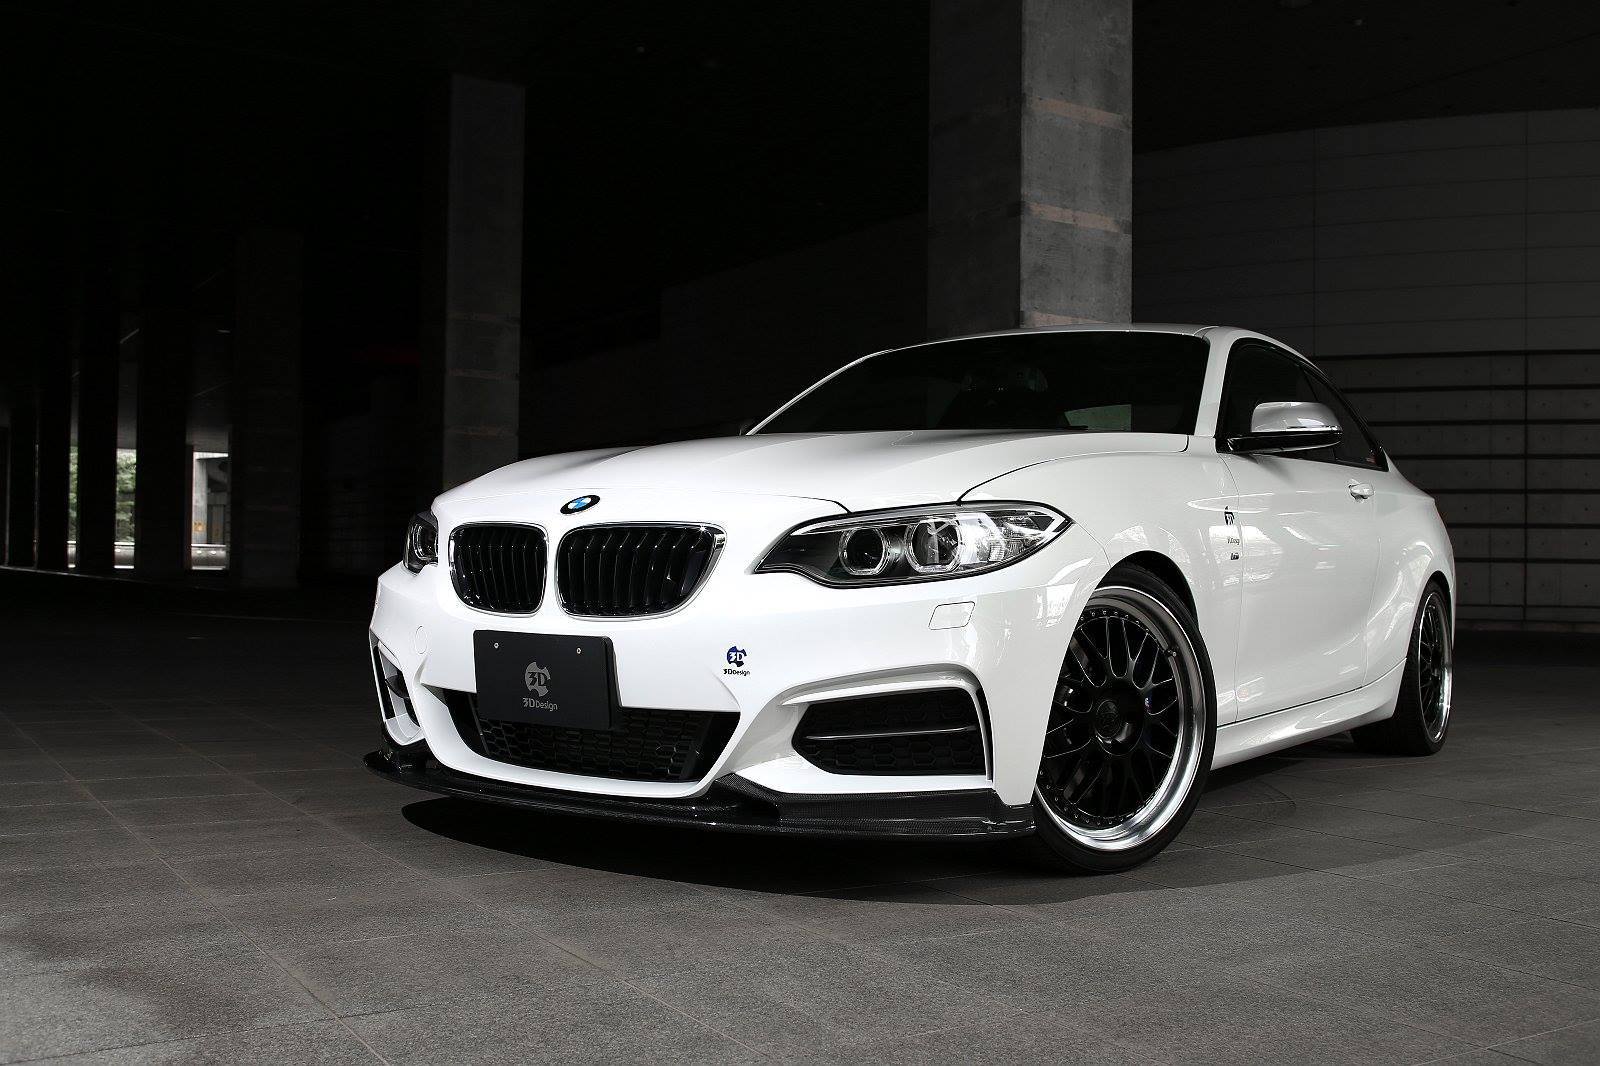 File:BMW M240i Coupé (F22) front.jpg - Wikimedia Commons